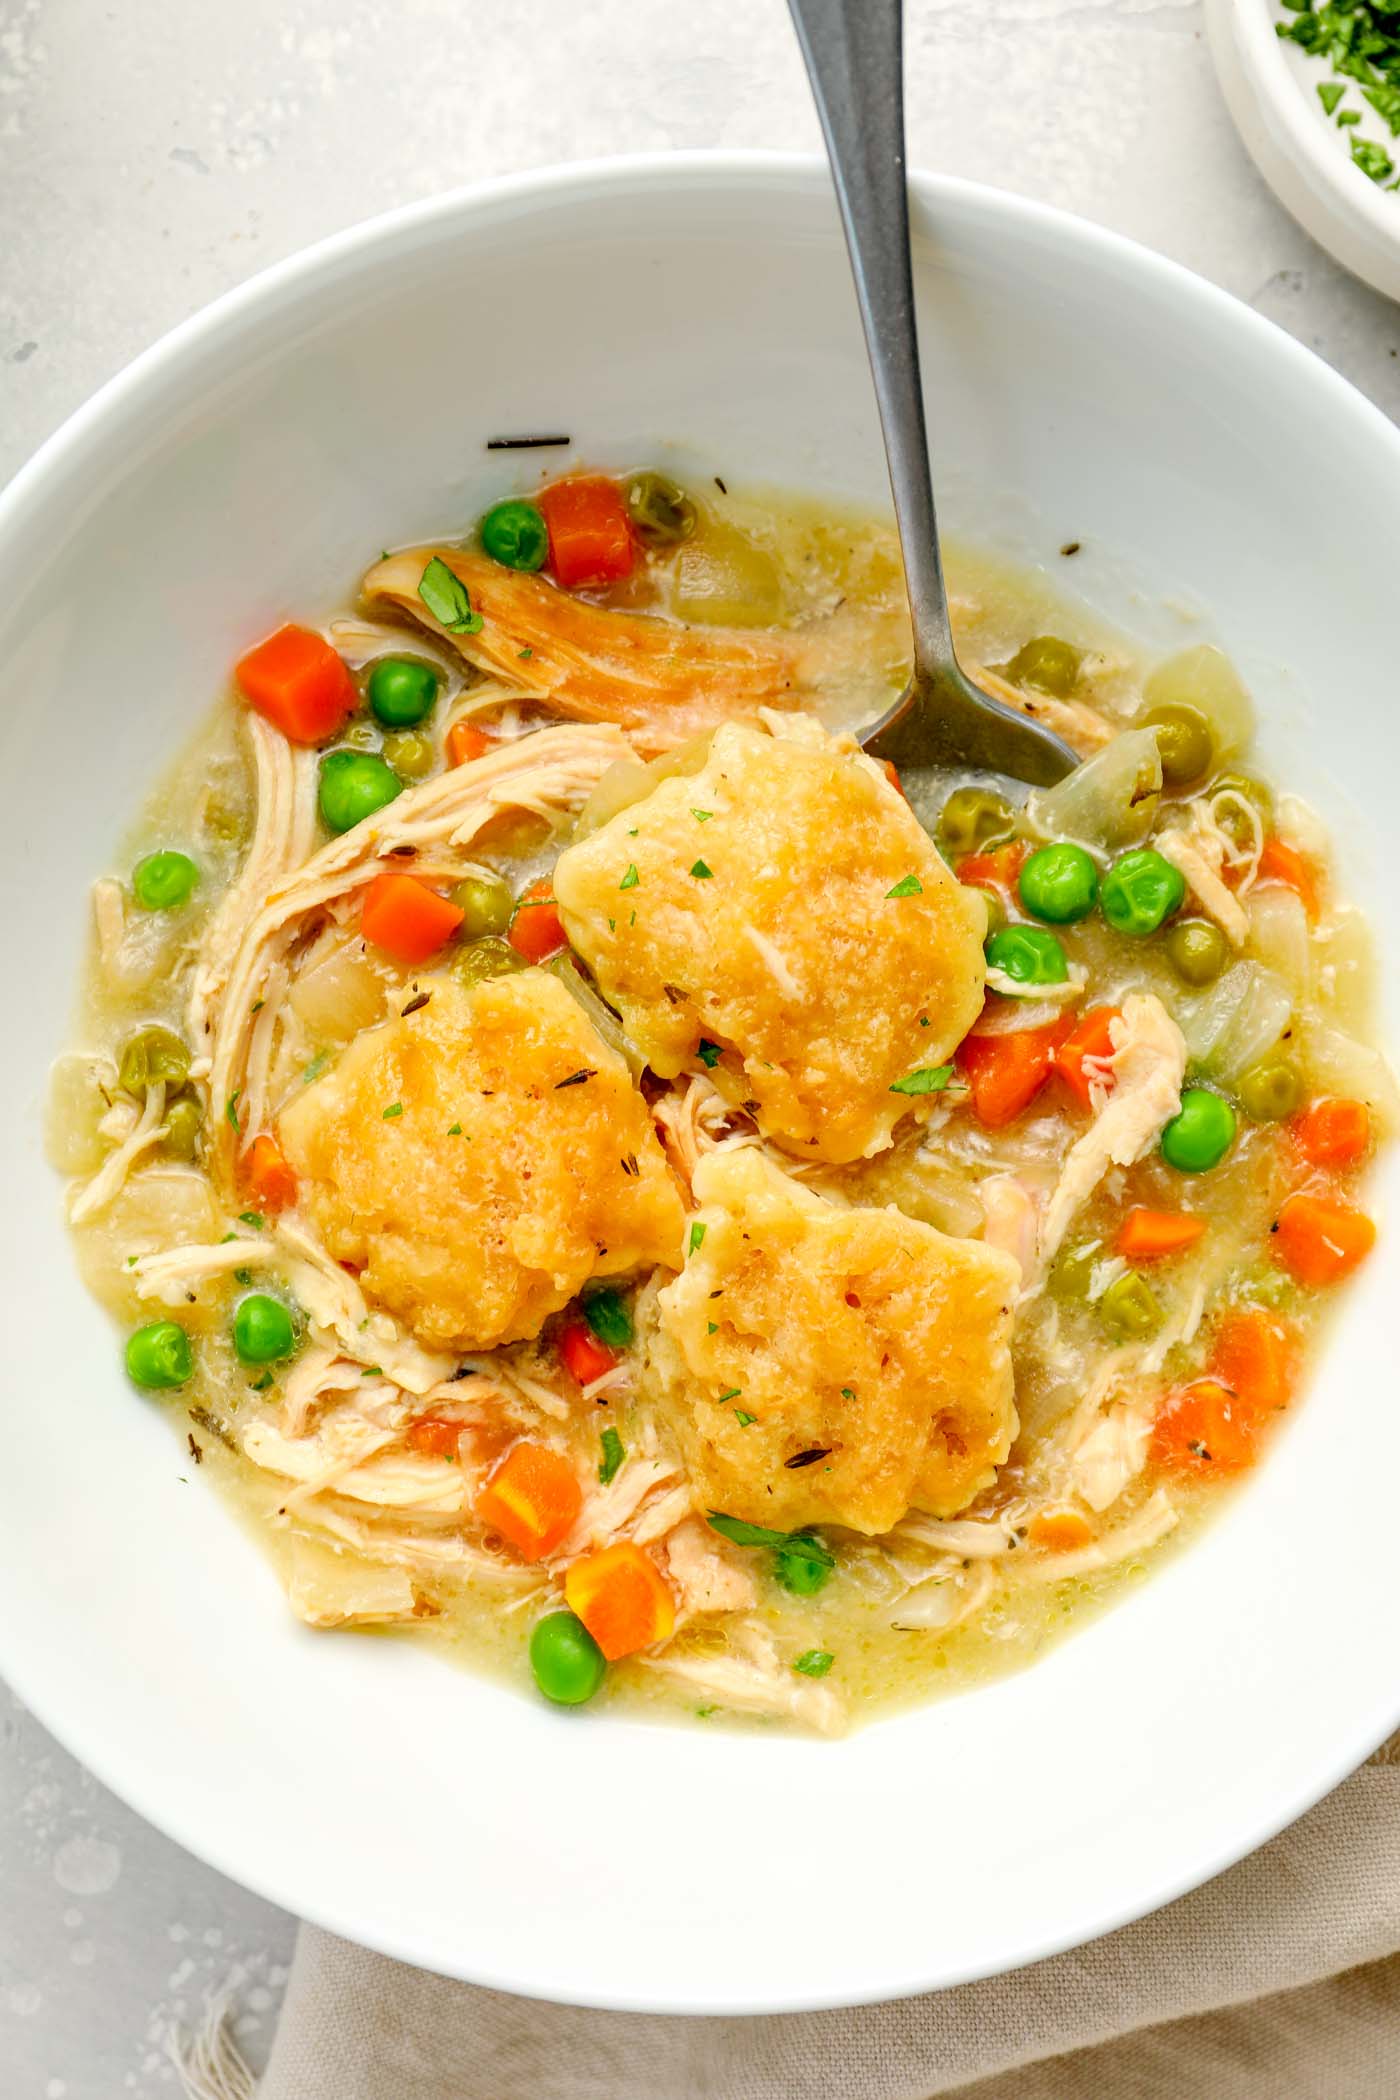 Serving of crockpot chicken and dumplings in a white bowl with a spoon.